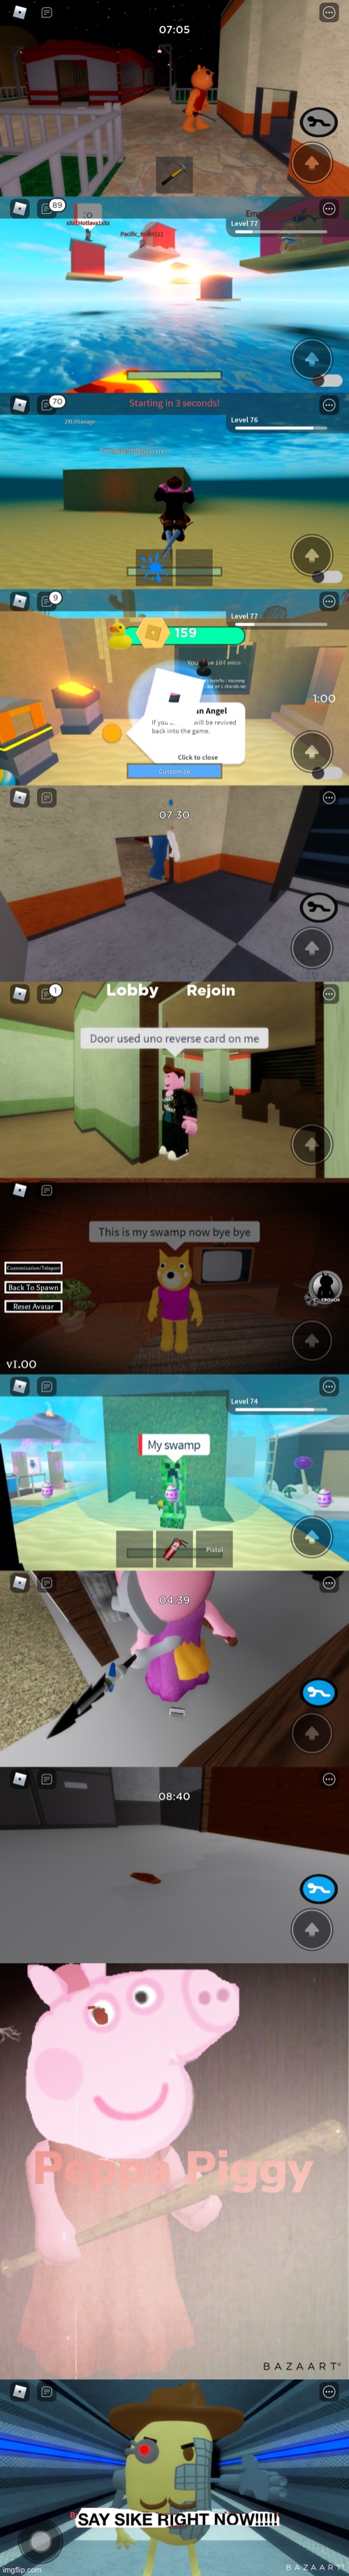 Extremely Cursed Roblox Pictures I took while playing roblox | image tagged in piggy,horrific housing,roblox | made w/ Imgflip meme maker